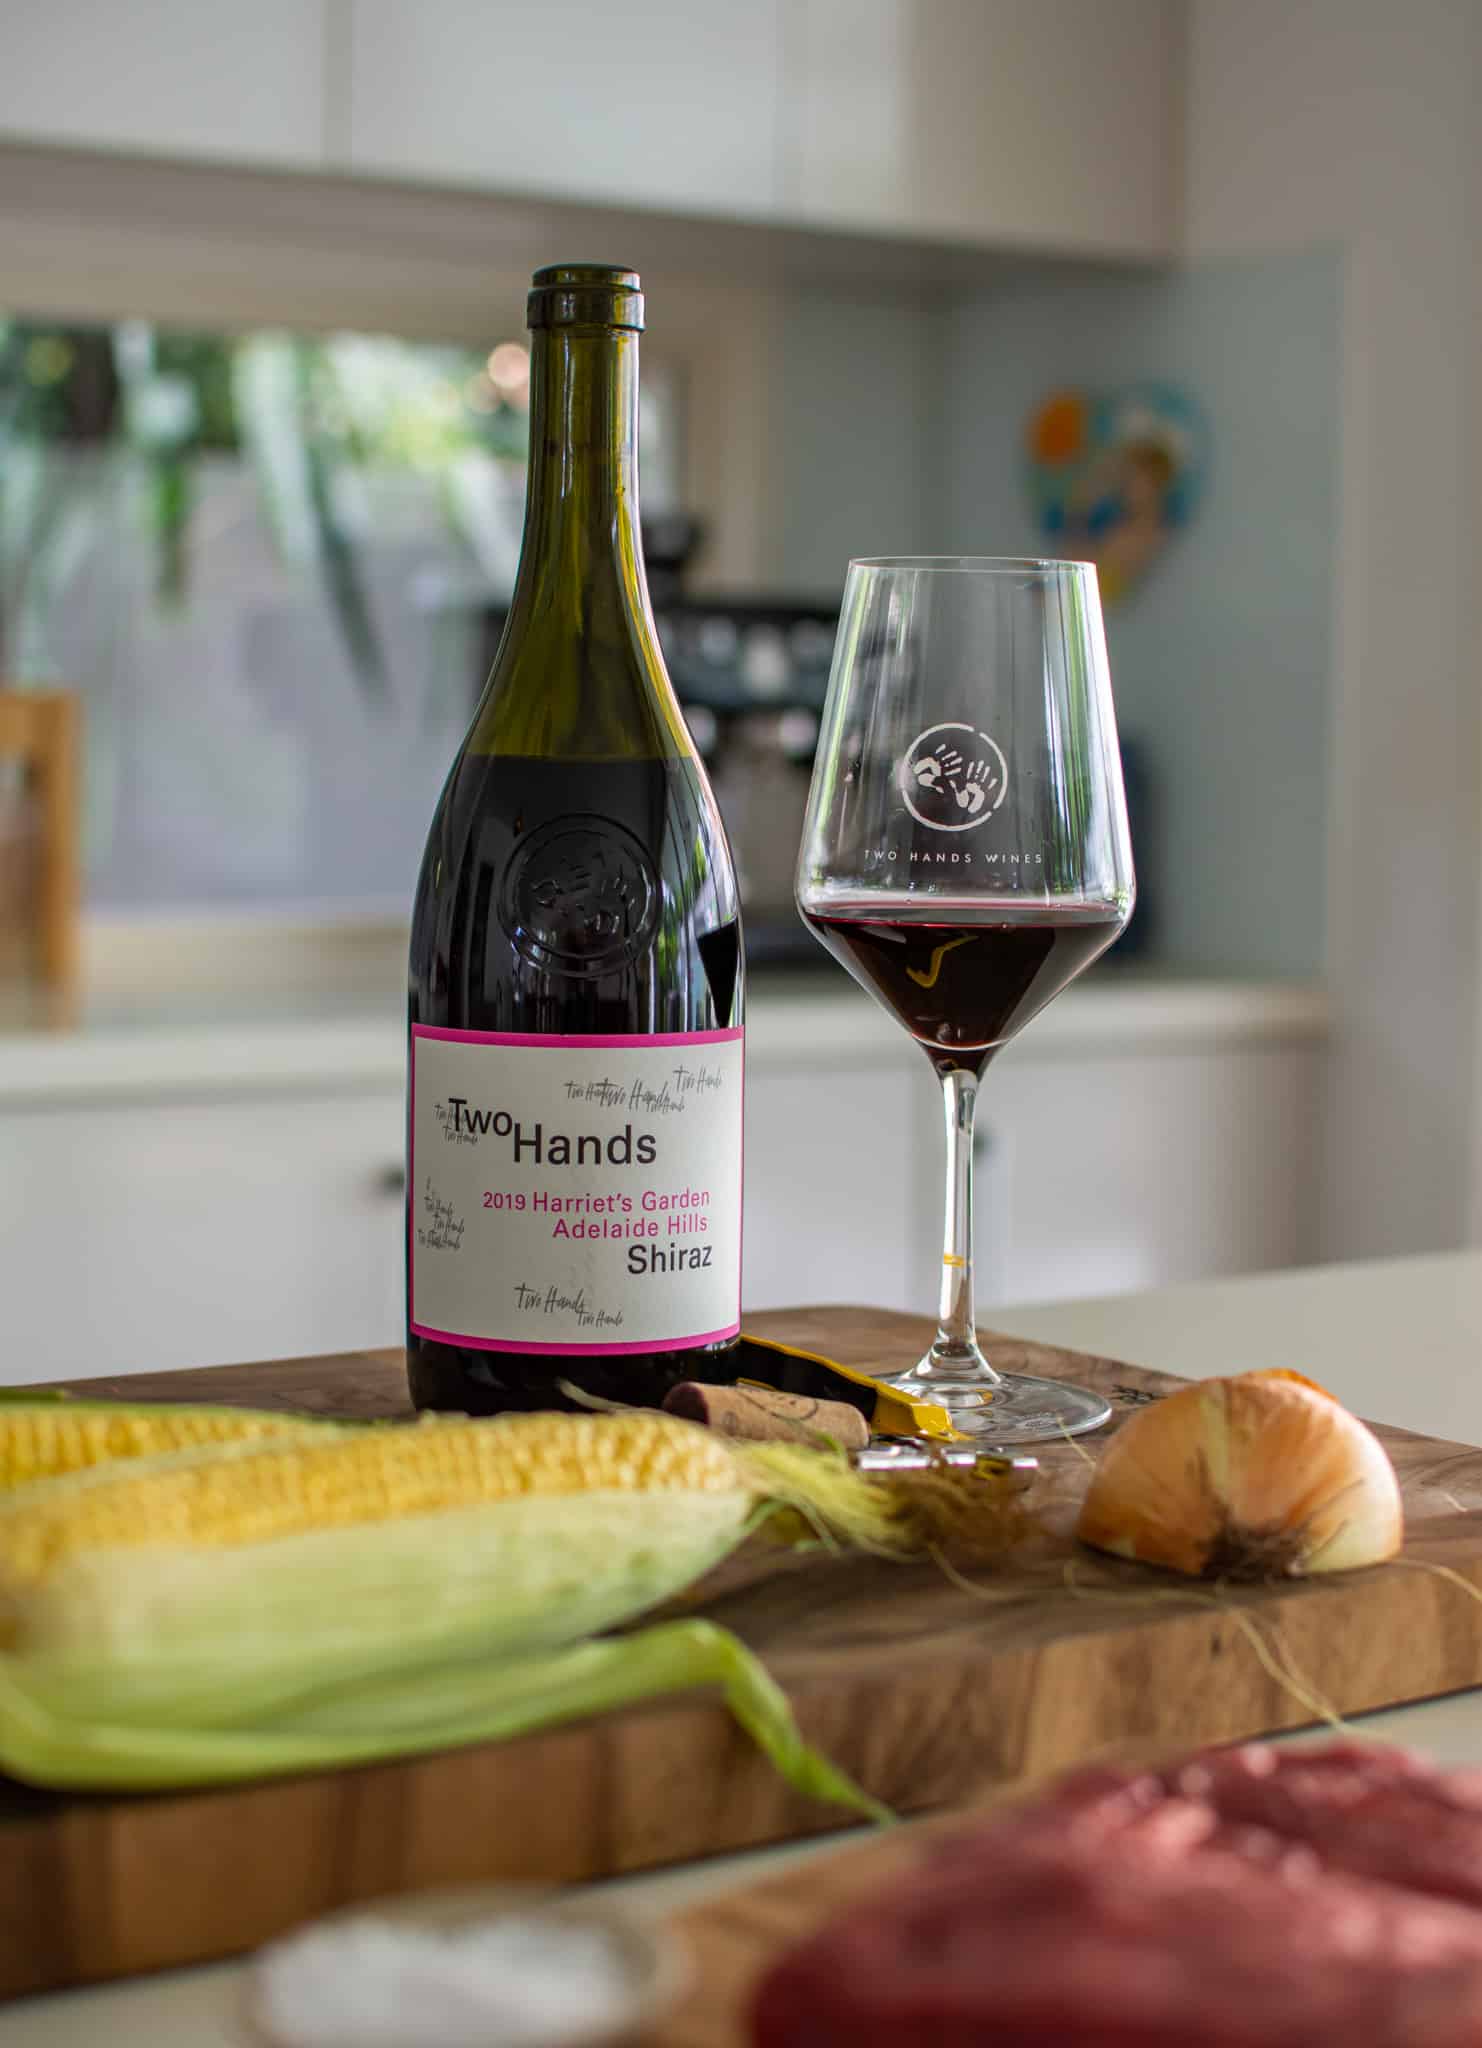 A bottle of Two Hands "Harriets Garden" wine in the kitchen with a glass of wine next to it